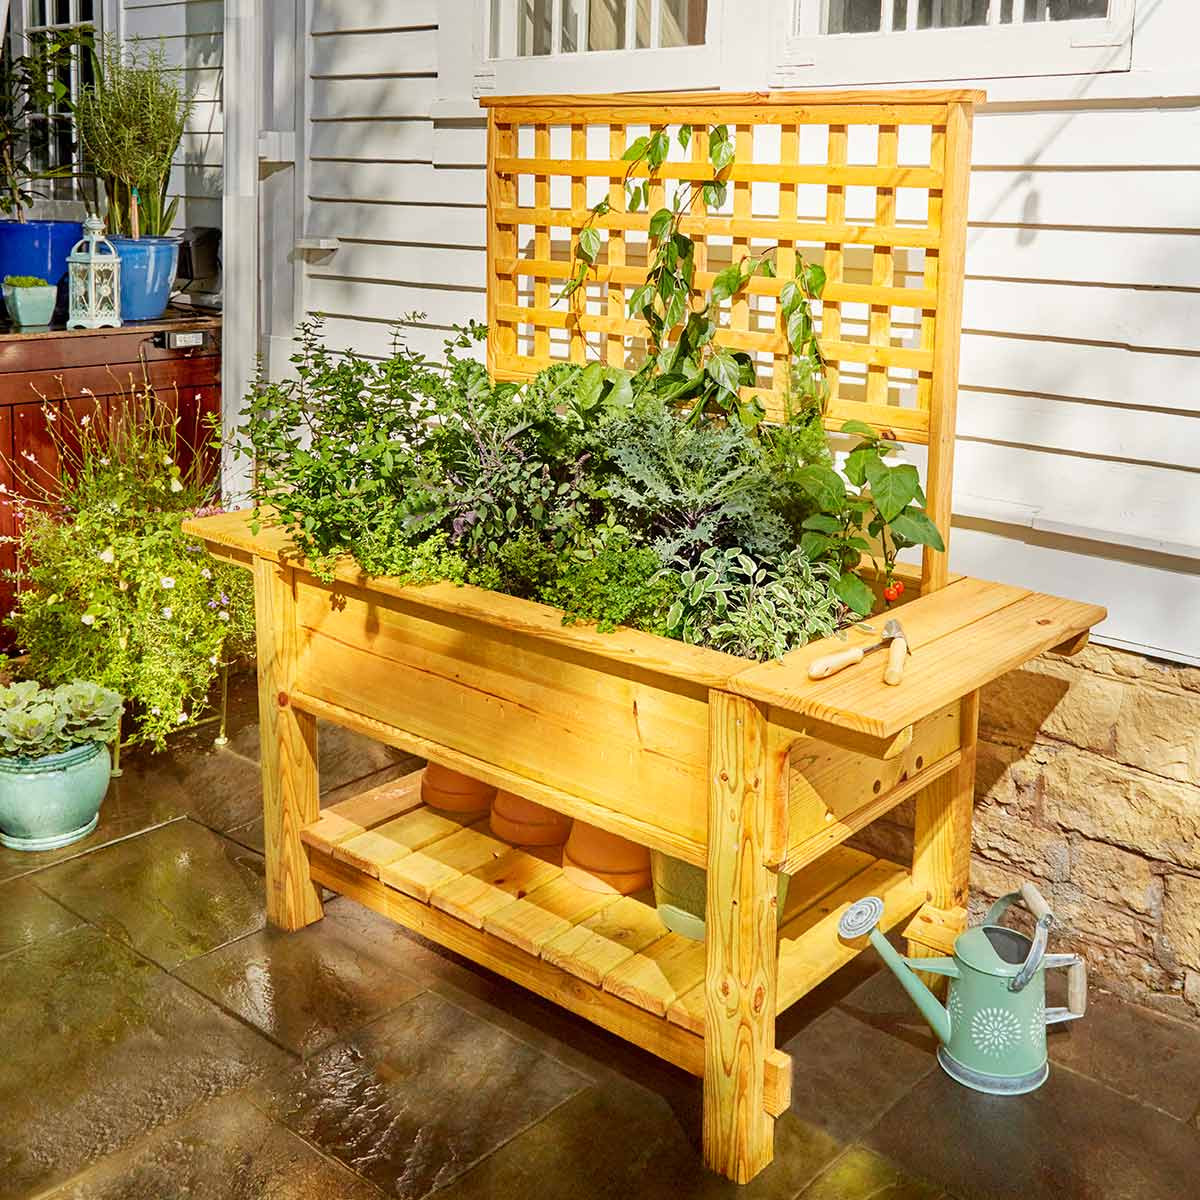 Wood Craft Ideas For Adults
 40 Outdoor Woodworking Projects for Beginners — The Family